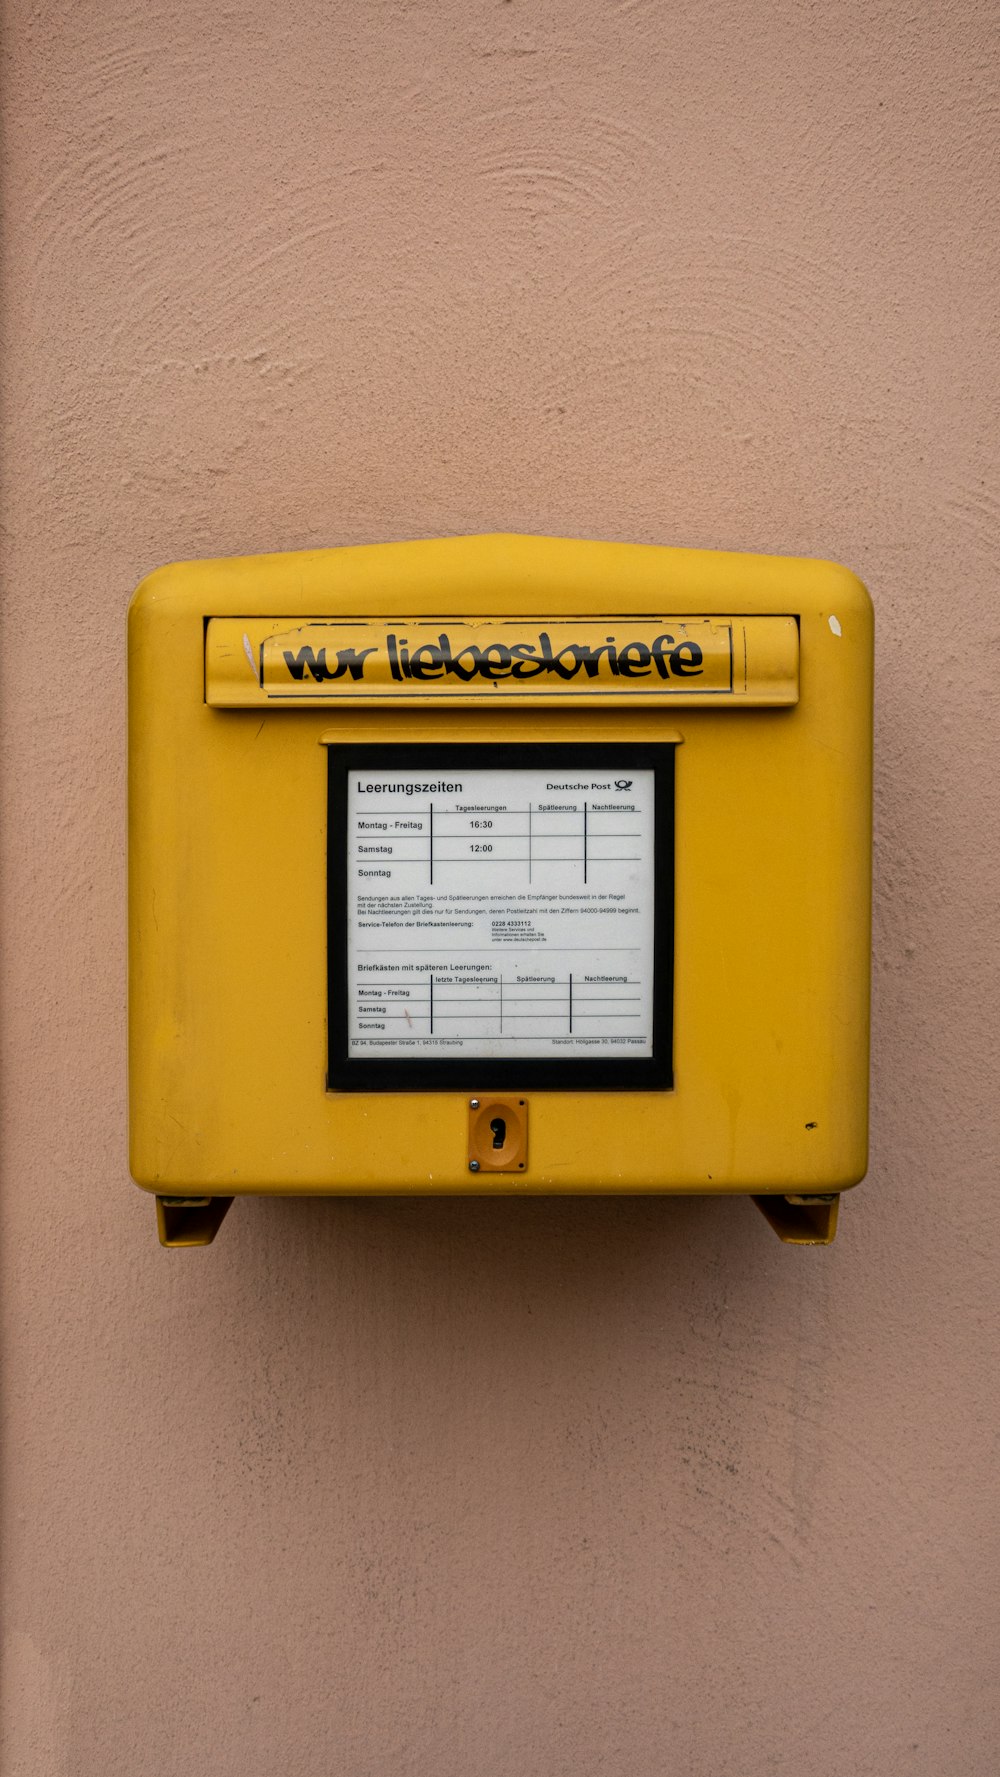 a yellow rectangular object with a label